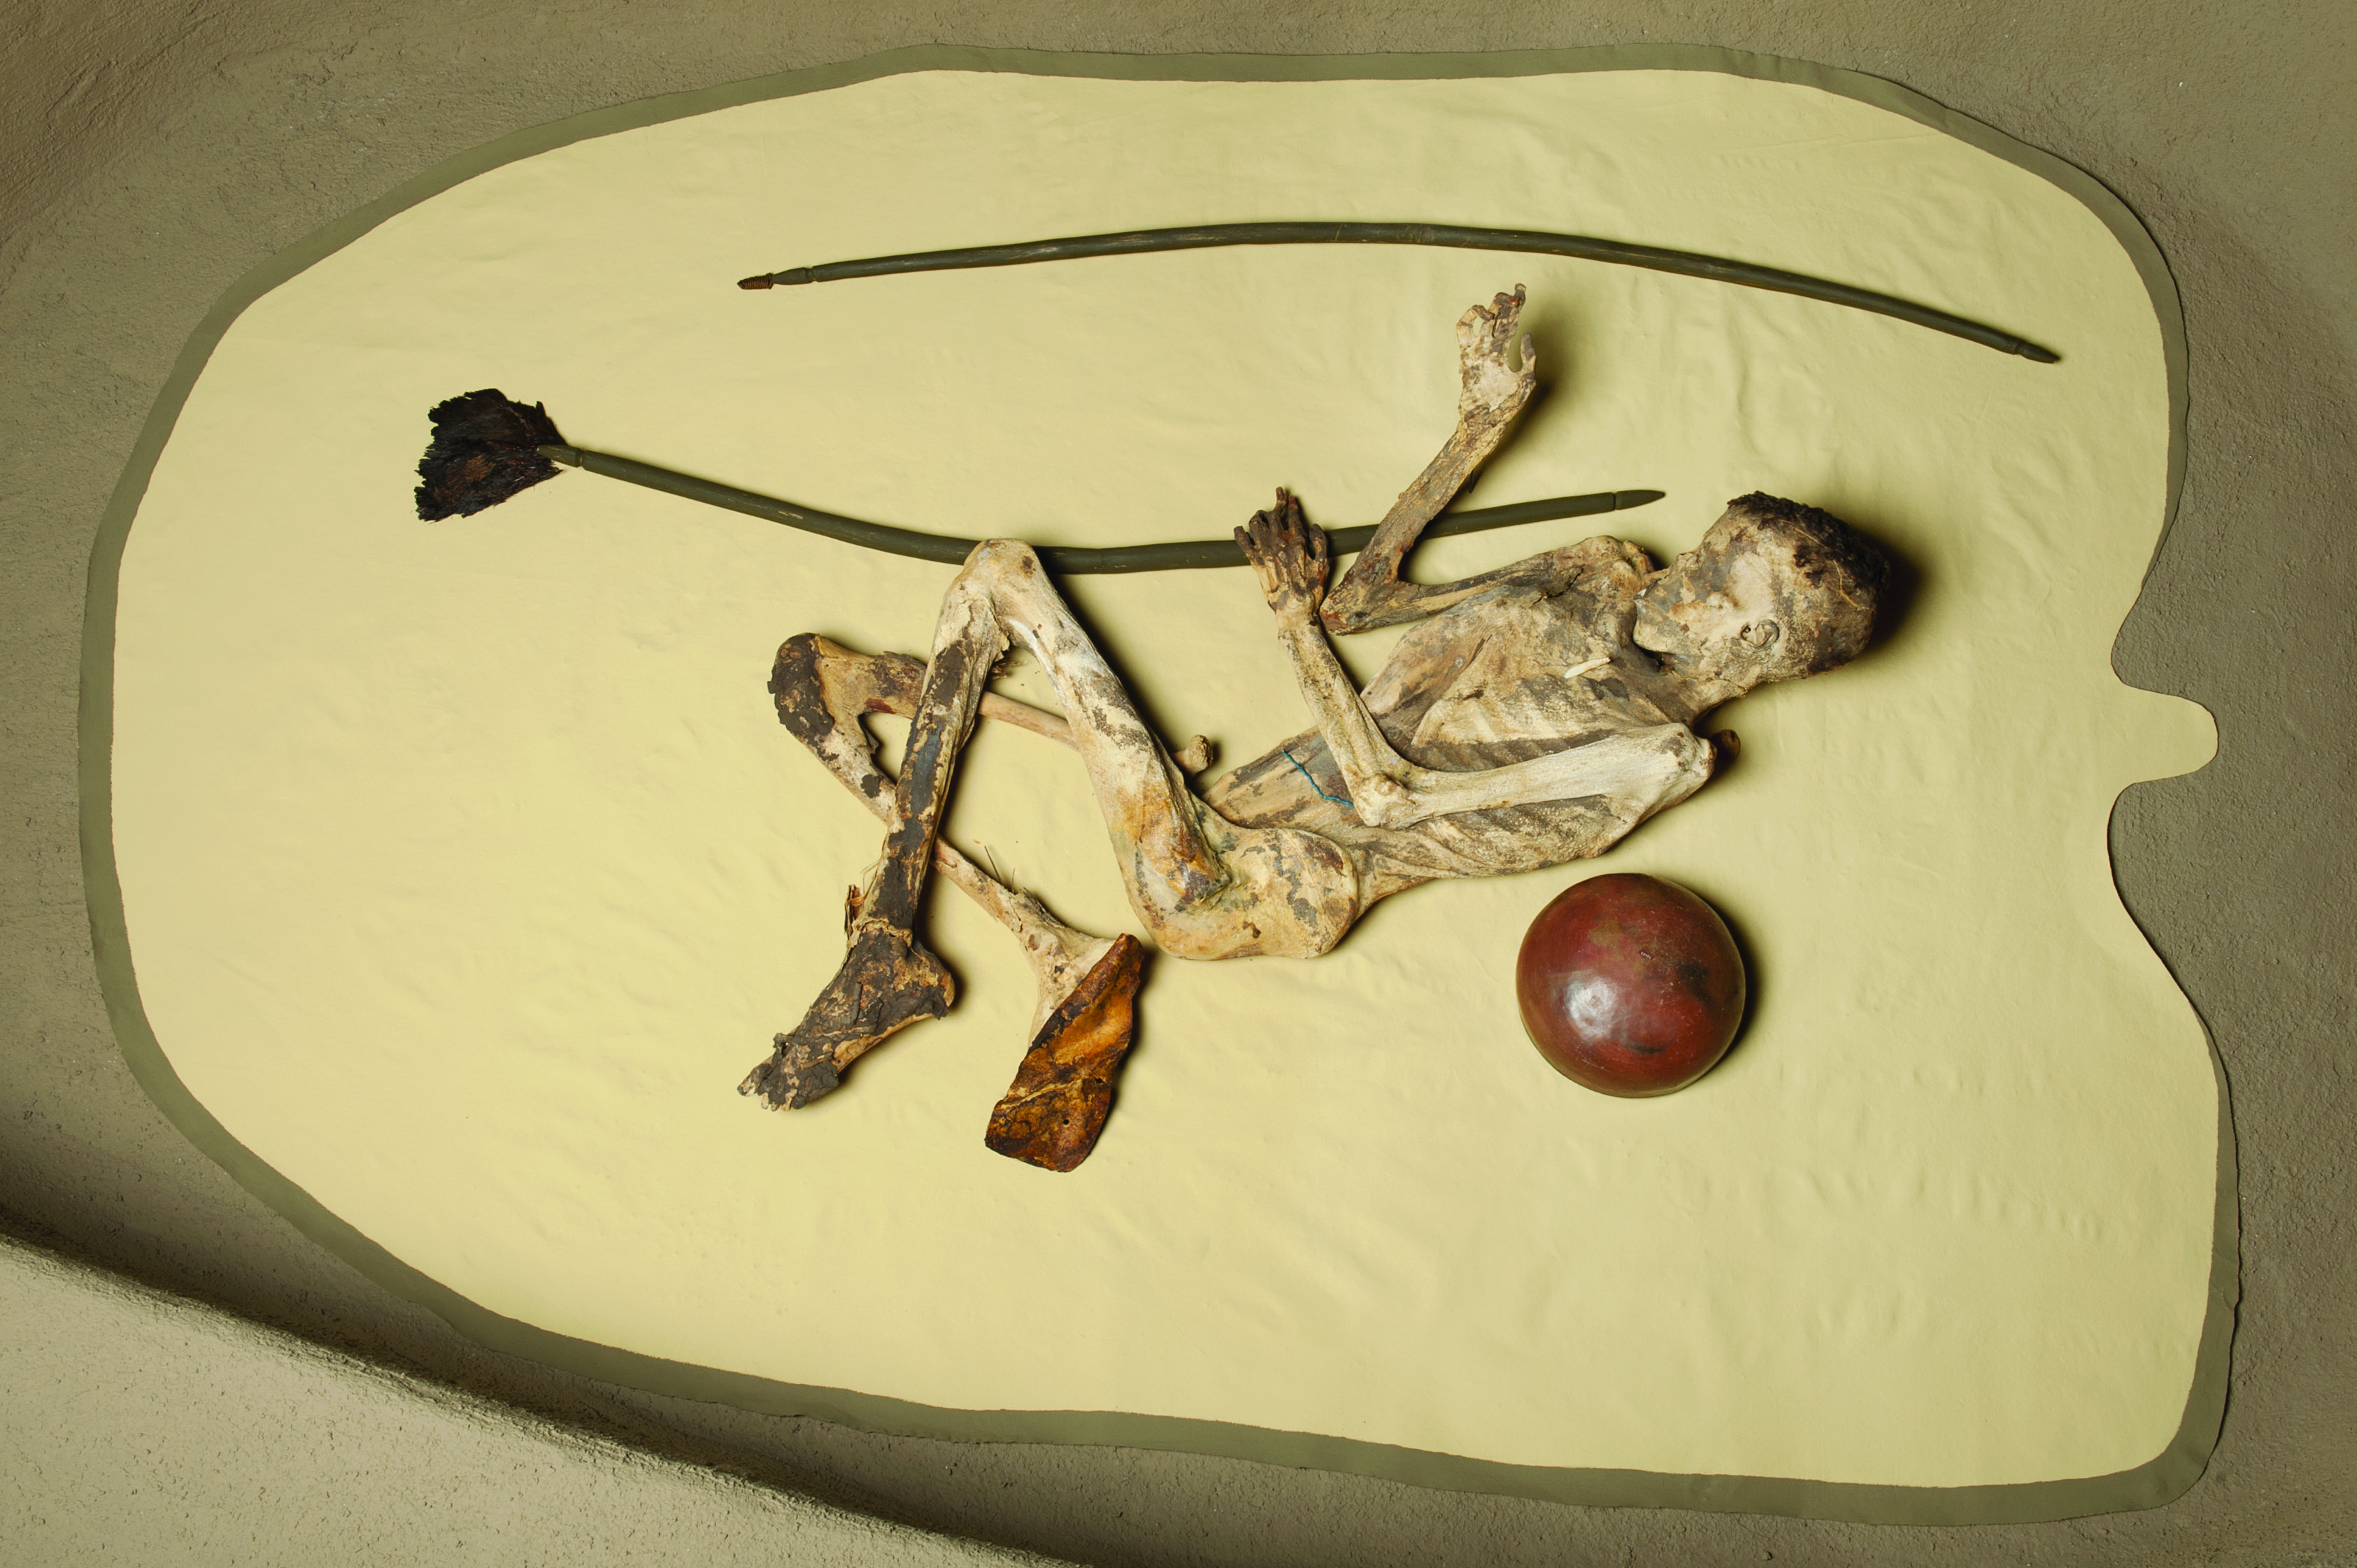 Reconstruction of the grave of the mummified archer excavated by Bonnet (1982), made with the original natural mummy, pottery and plume of ostrich feathers (Kerma ancien II, 2300-2150 BC)